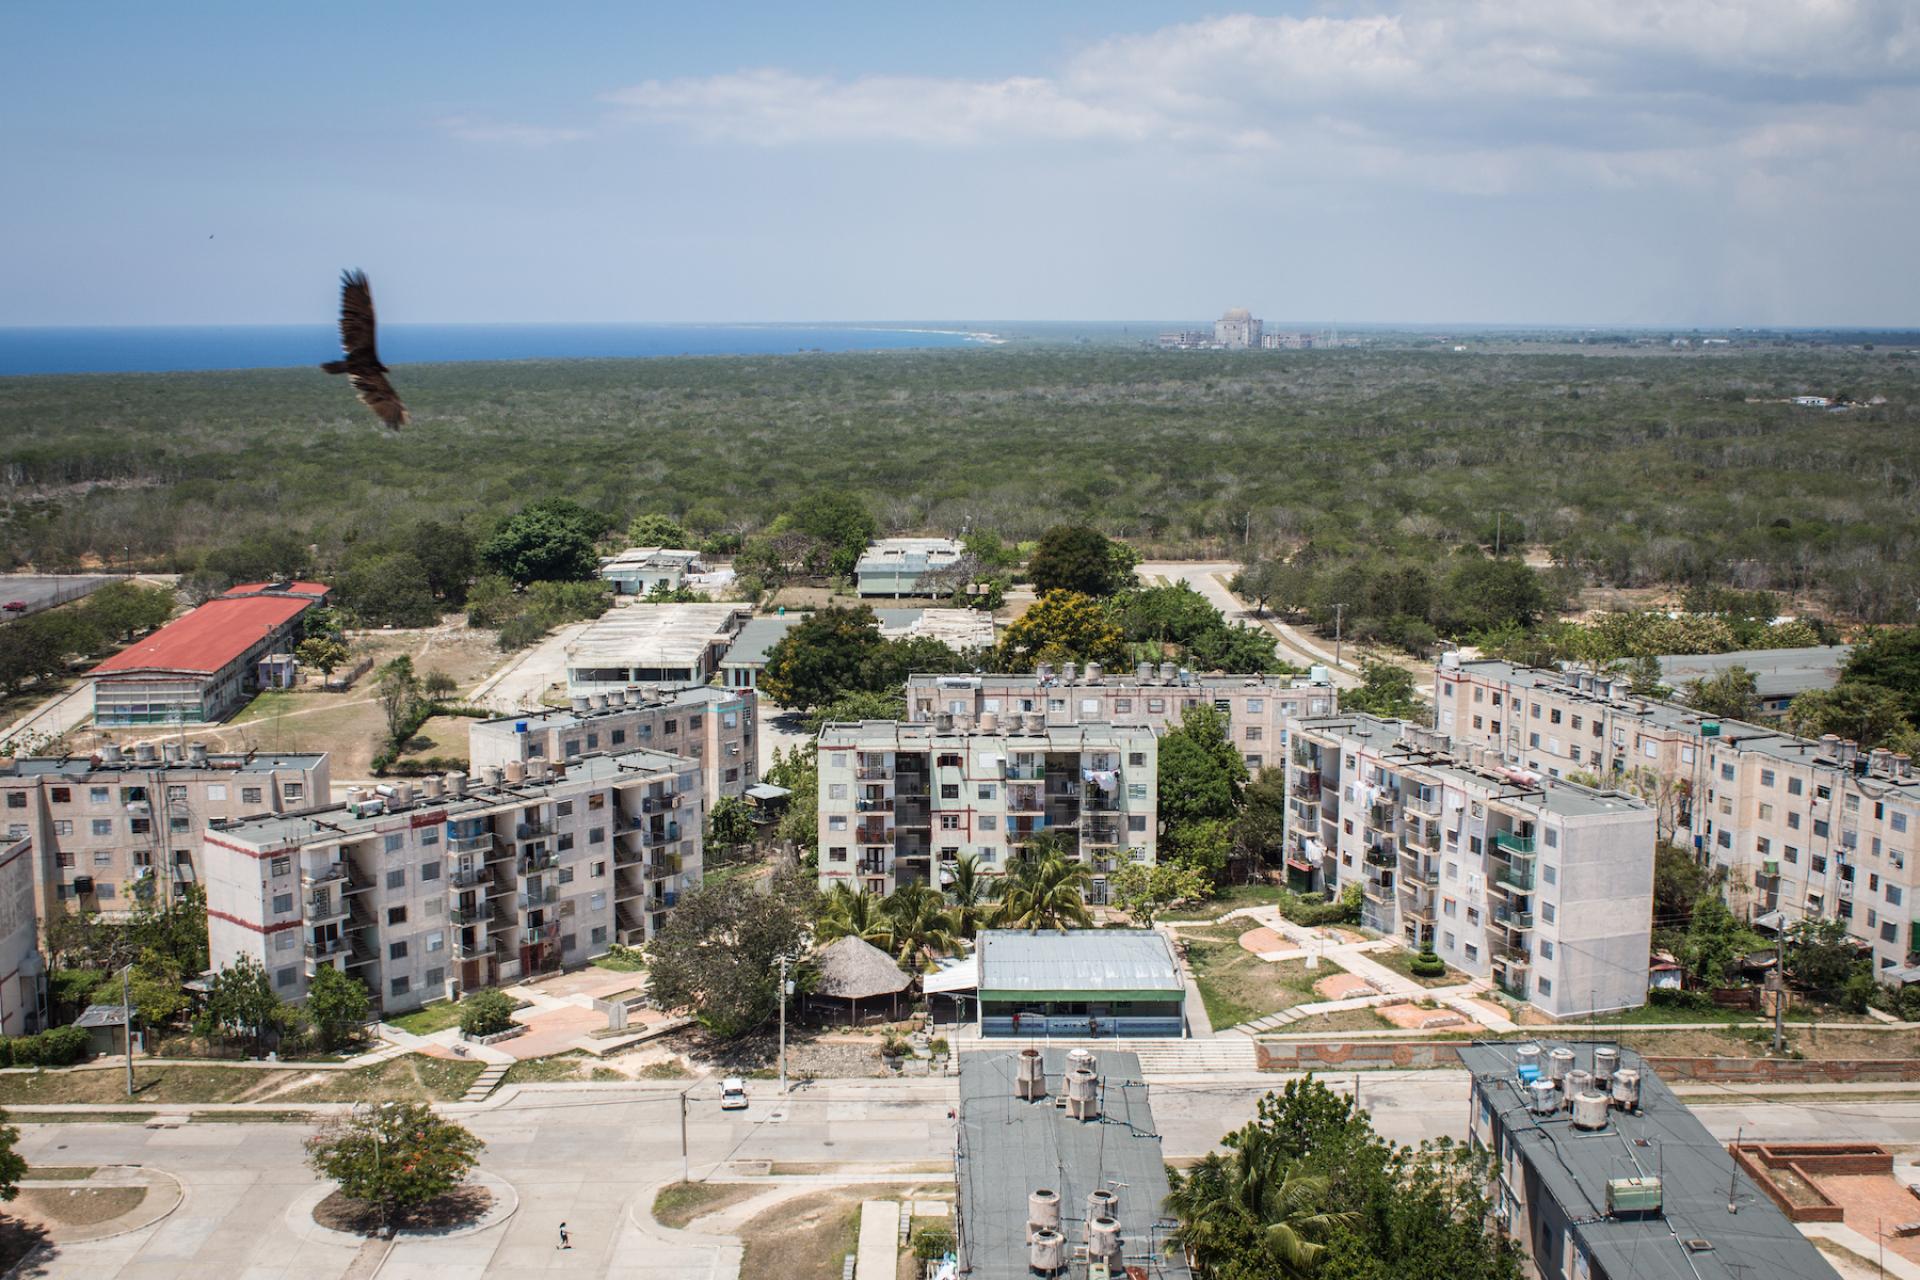 A Cuban turkey vulture circles over the quiet streets of Ciudad Nuclear.